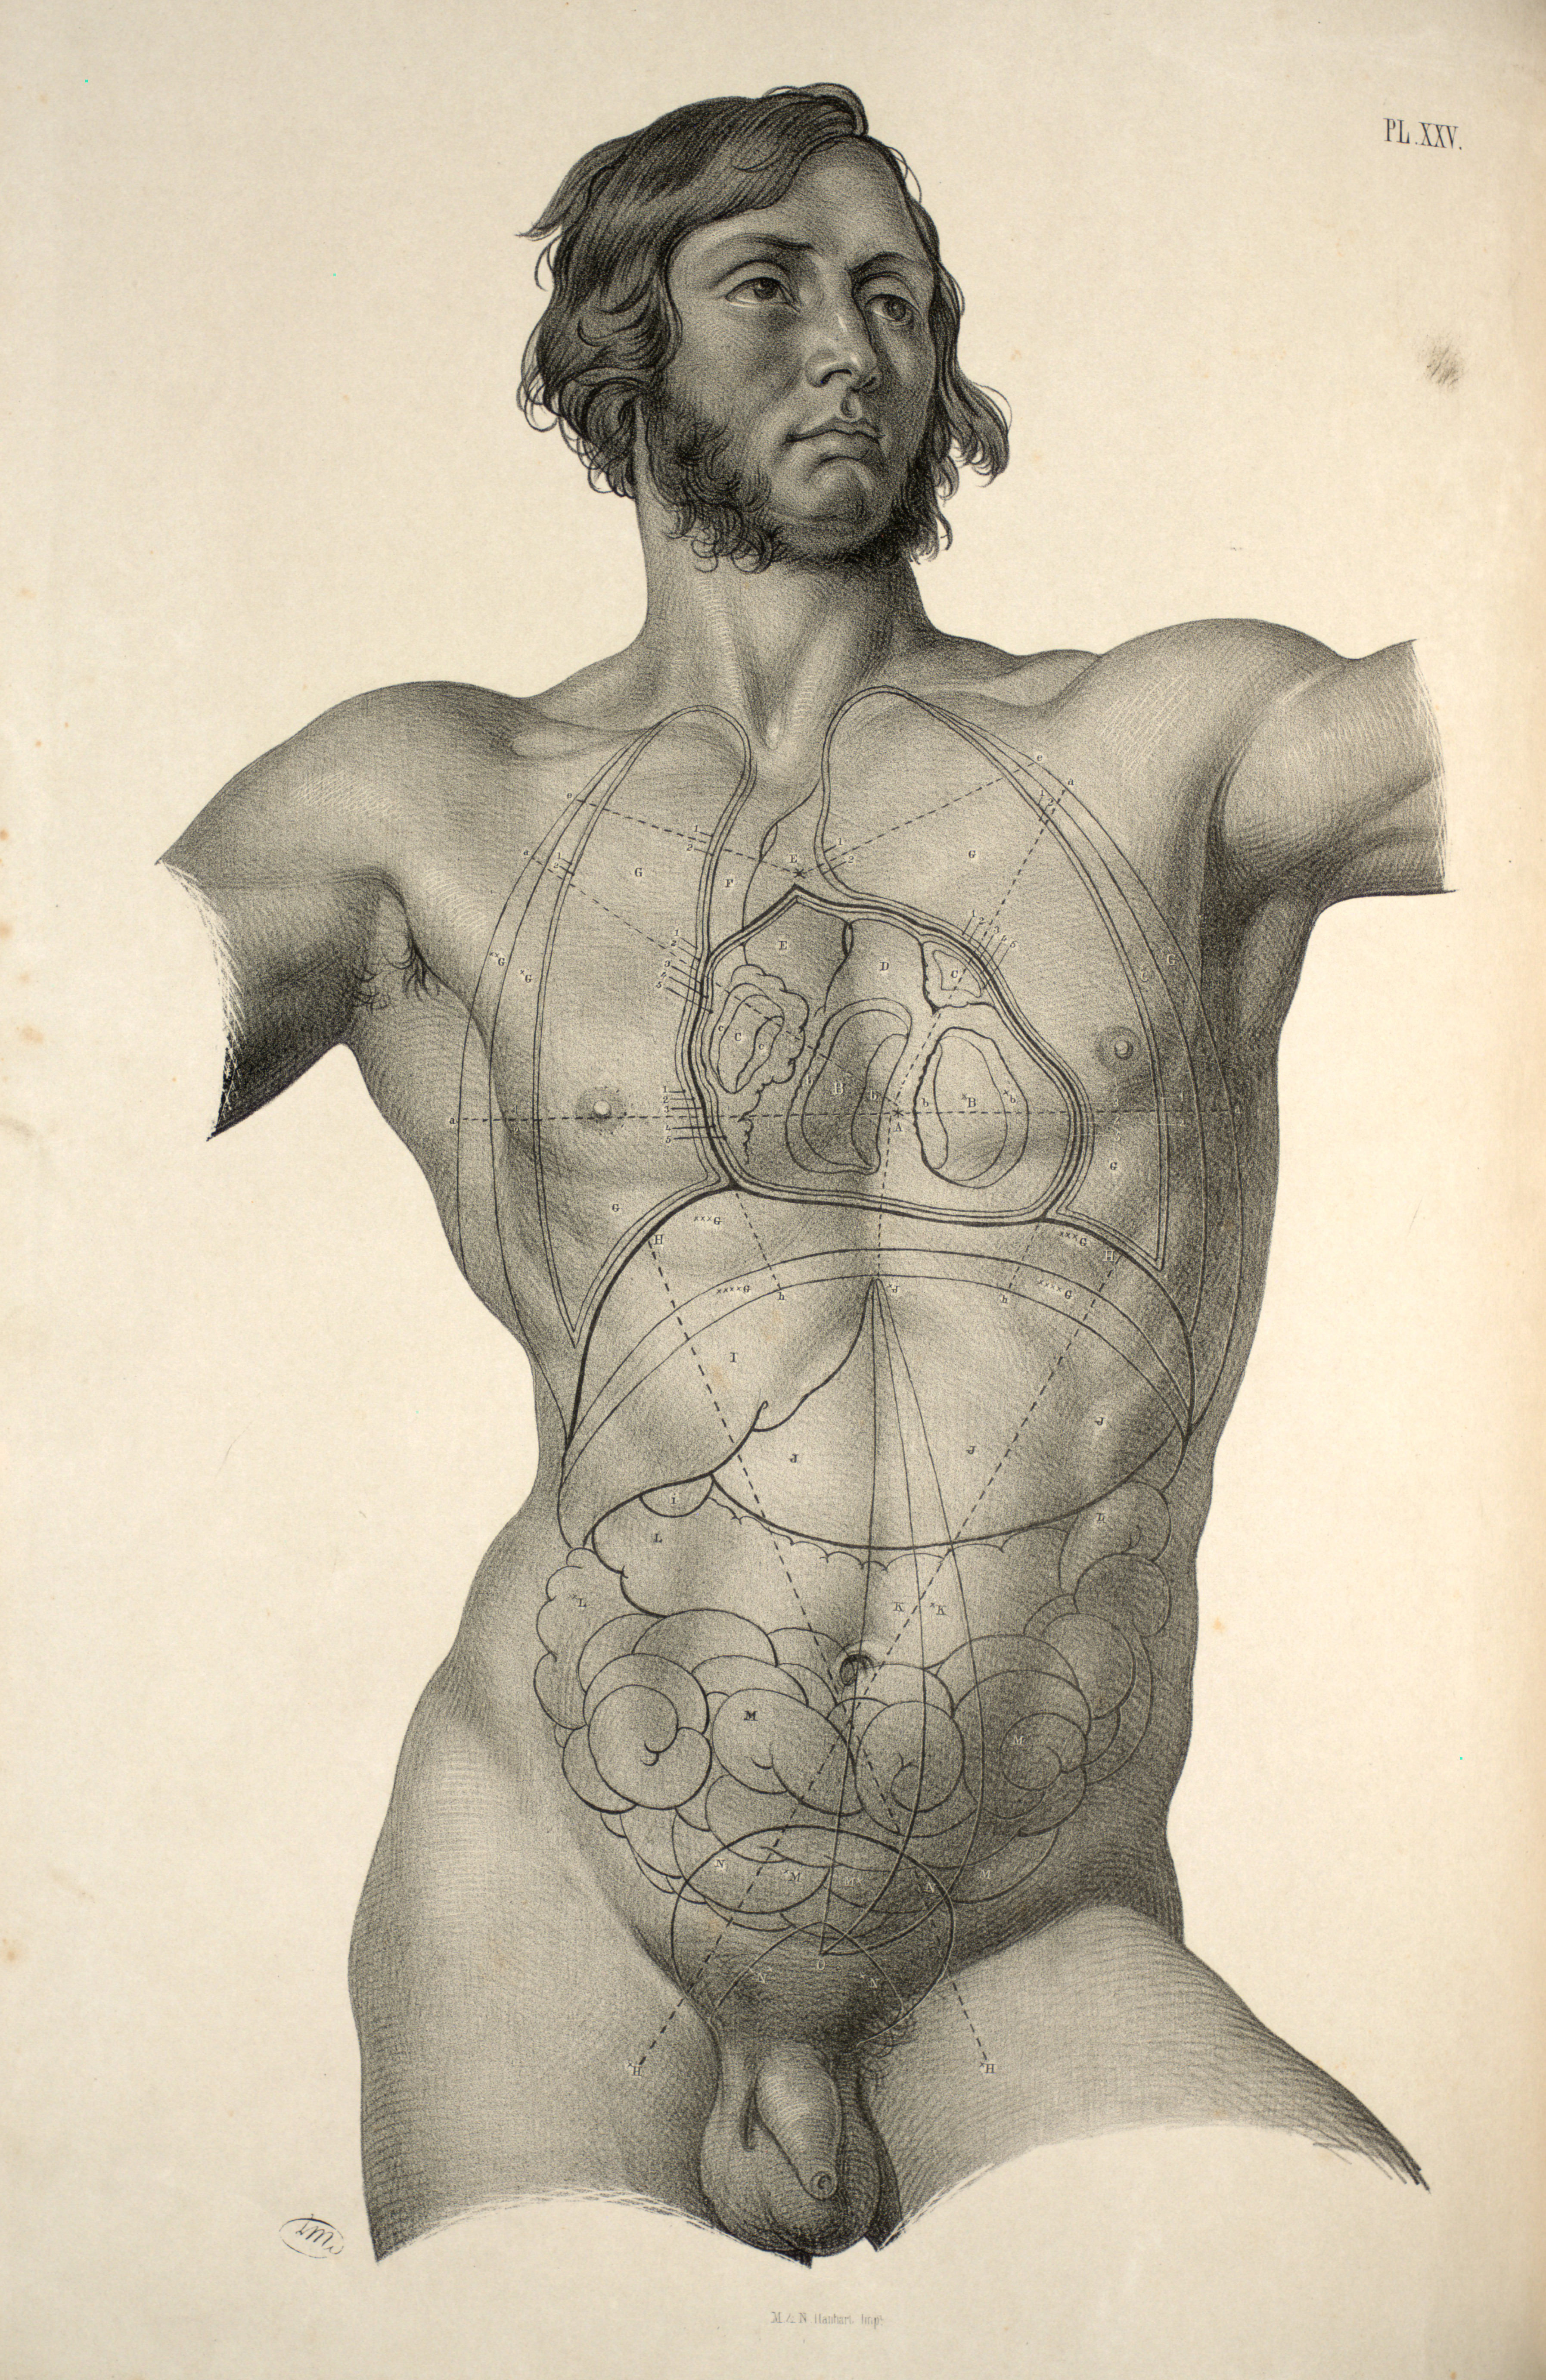 from Joseph Maclise, <i>Surgical Anatomy</i> (London: John Churchill, 1856), Plate 25, 1856, lithograph. Wellcome Collection.